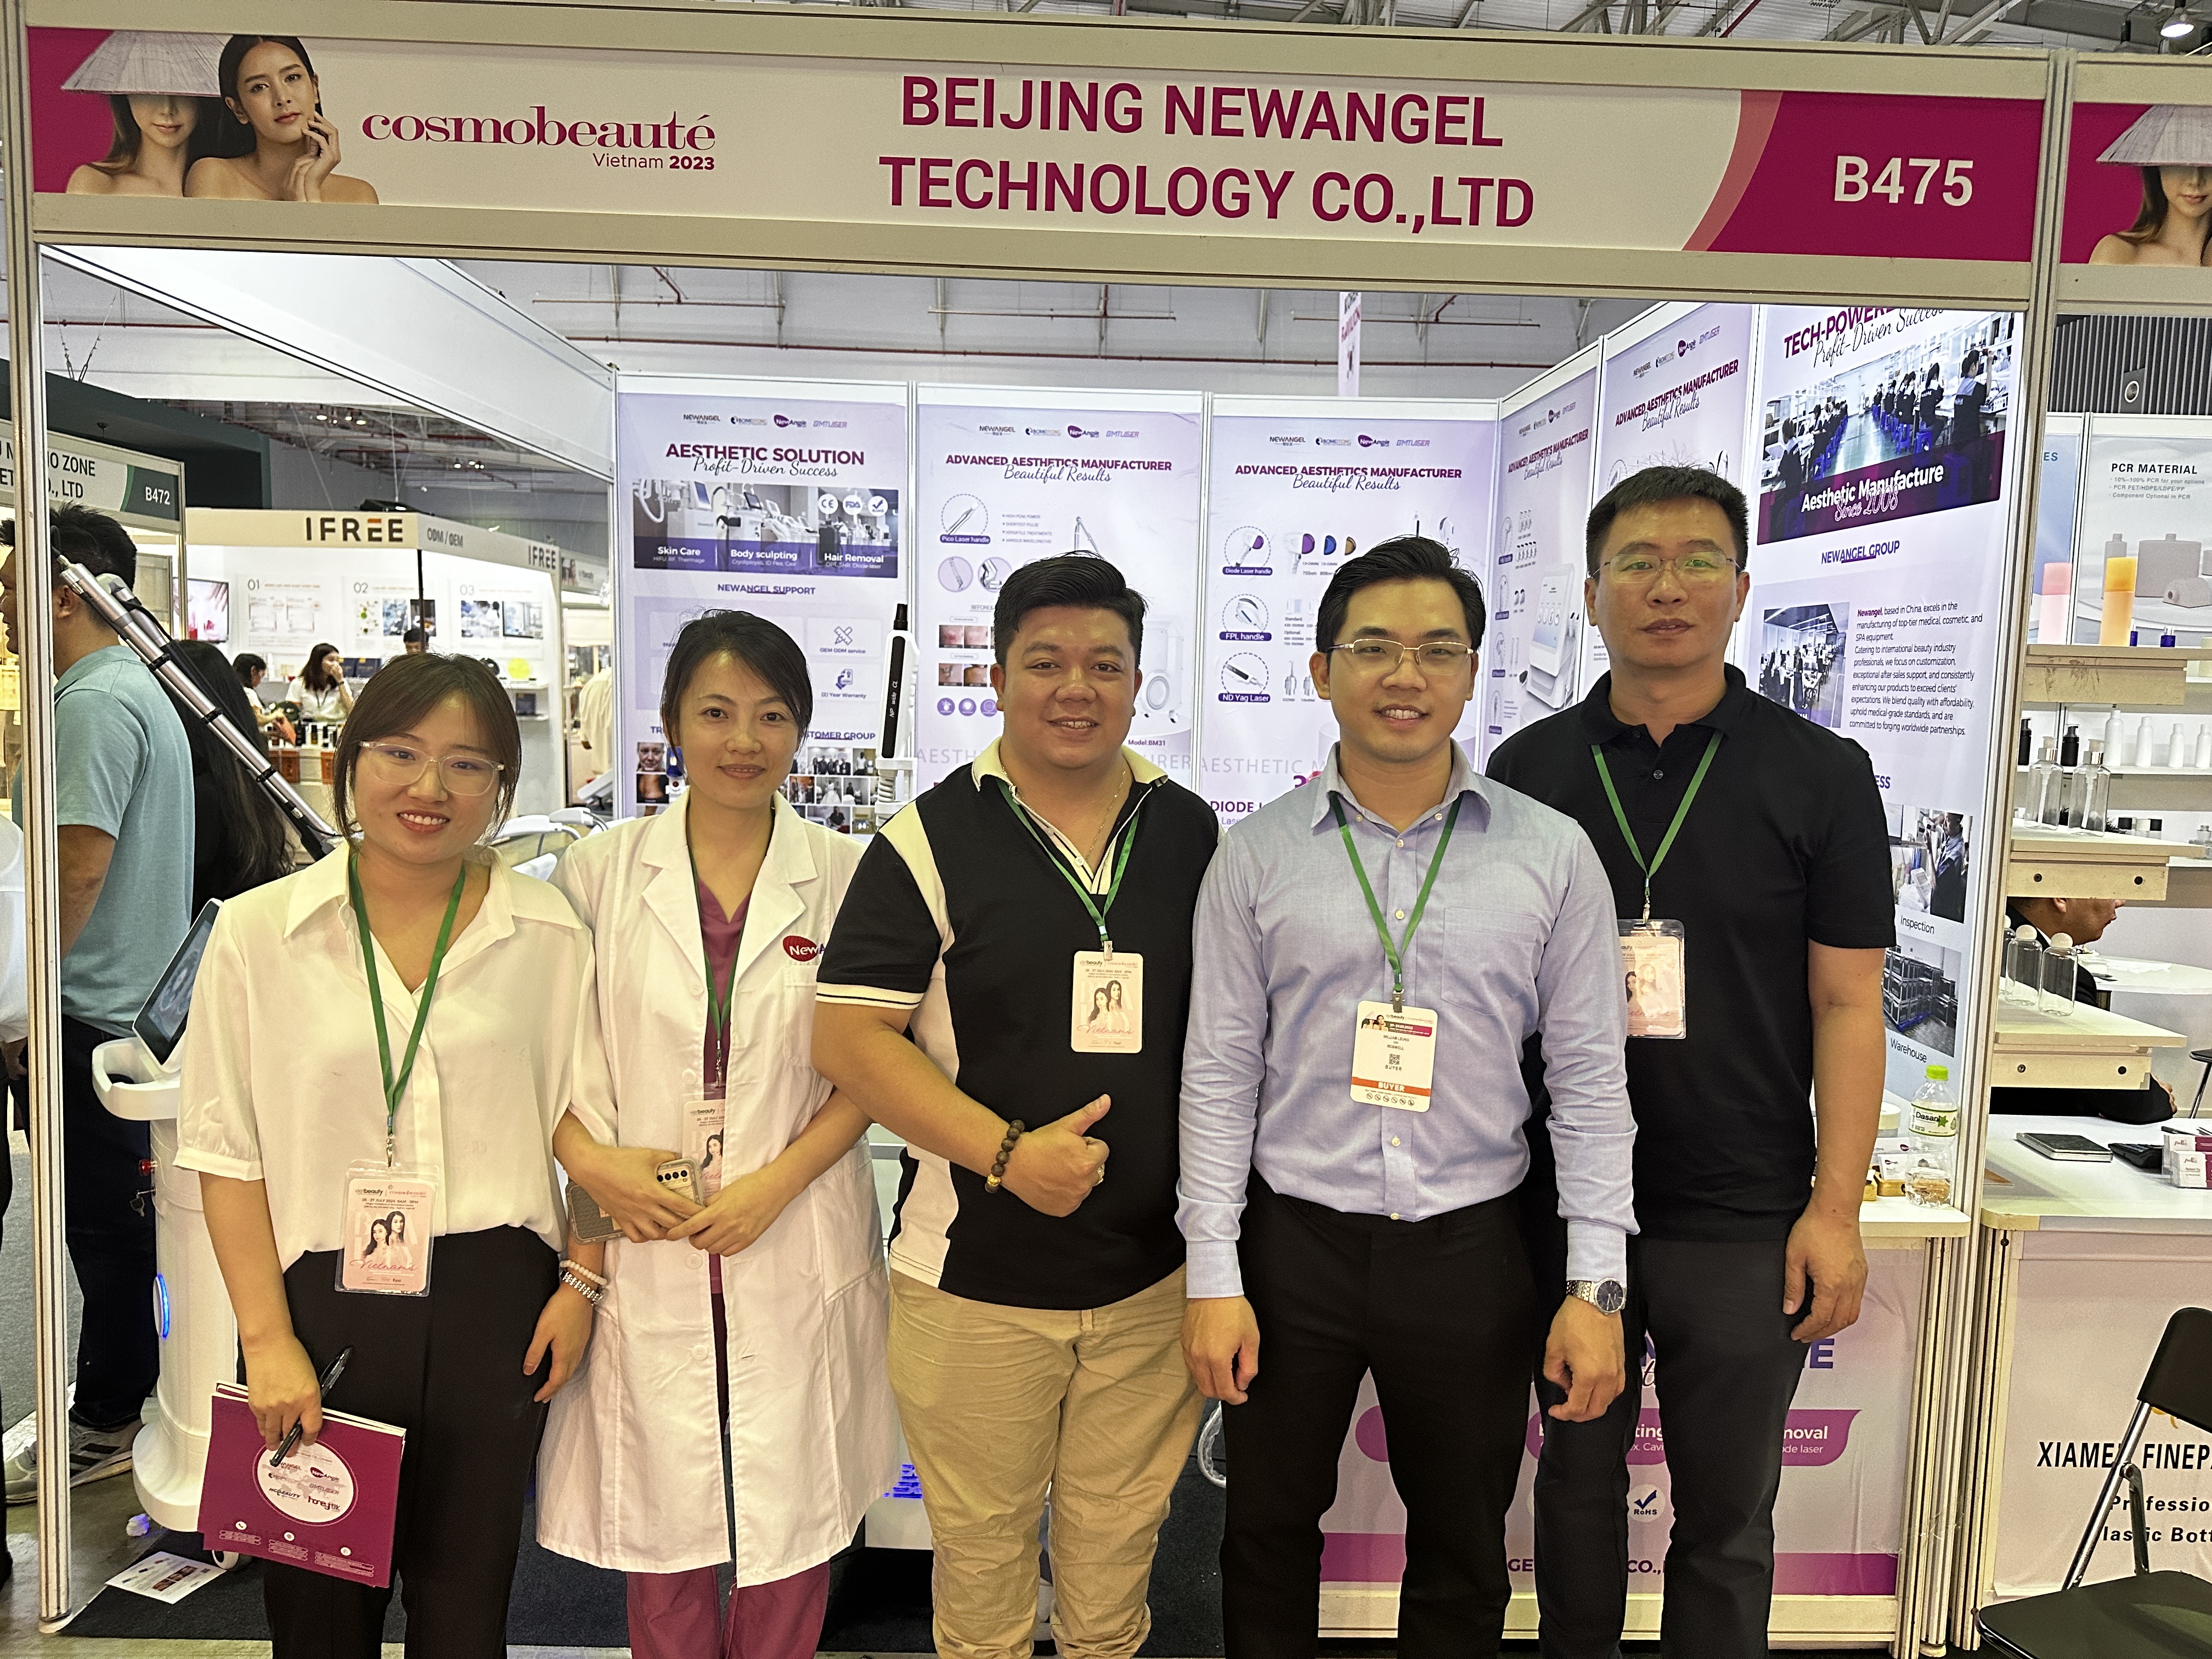 Mekong Beauty Expo & Vietbeauty Cosmebeaute Vietnam 2023! Join Us at Booth B475!